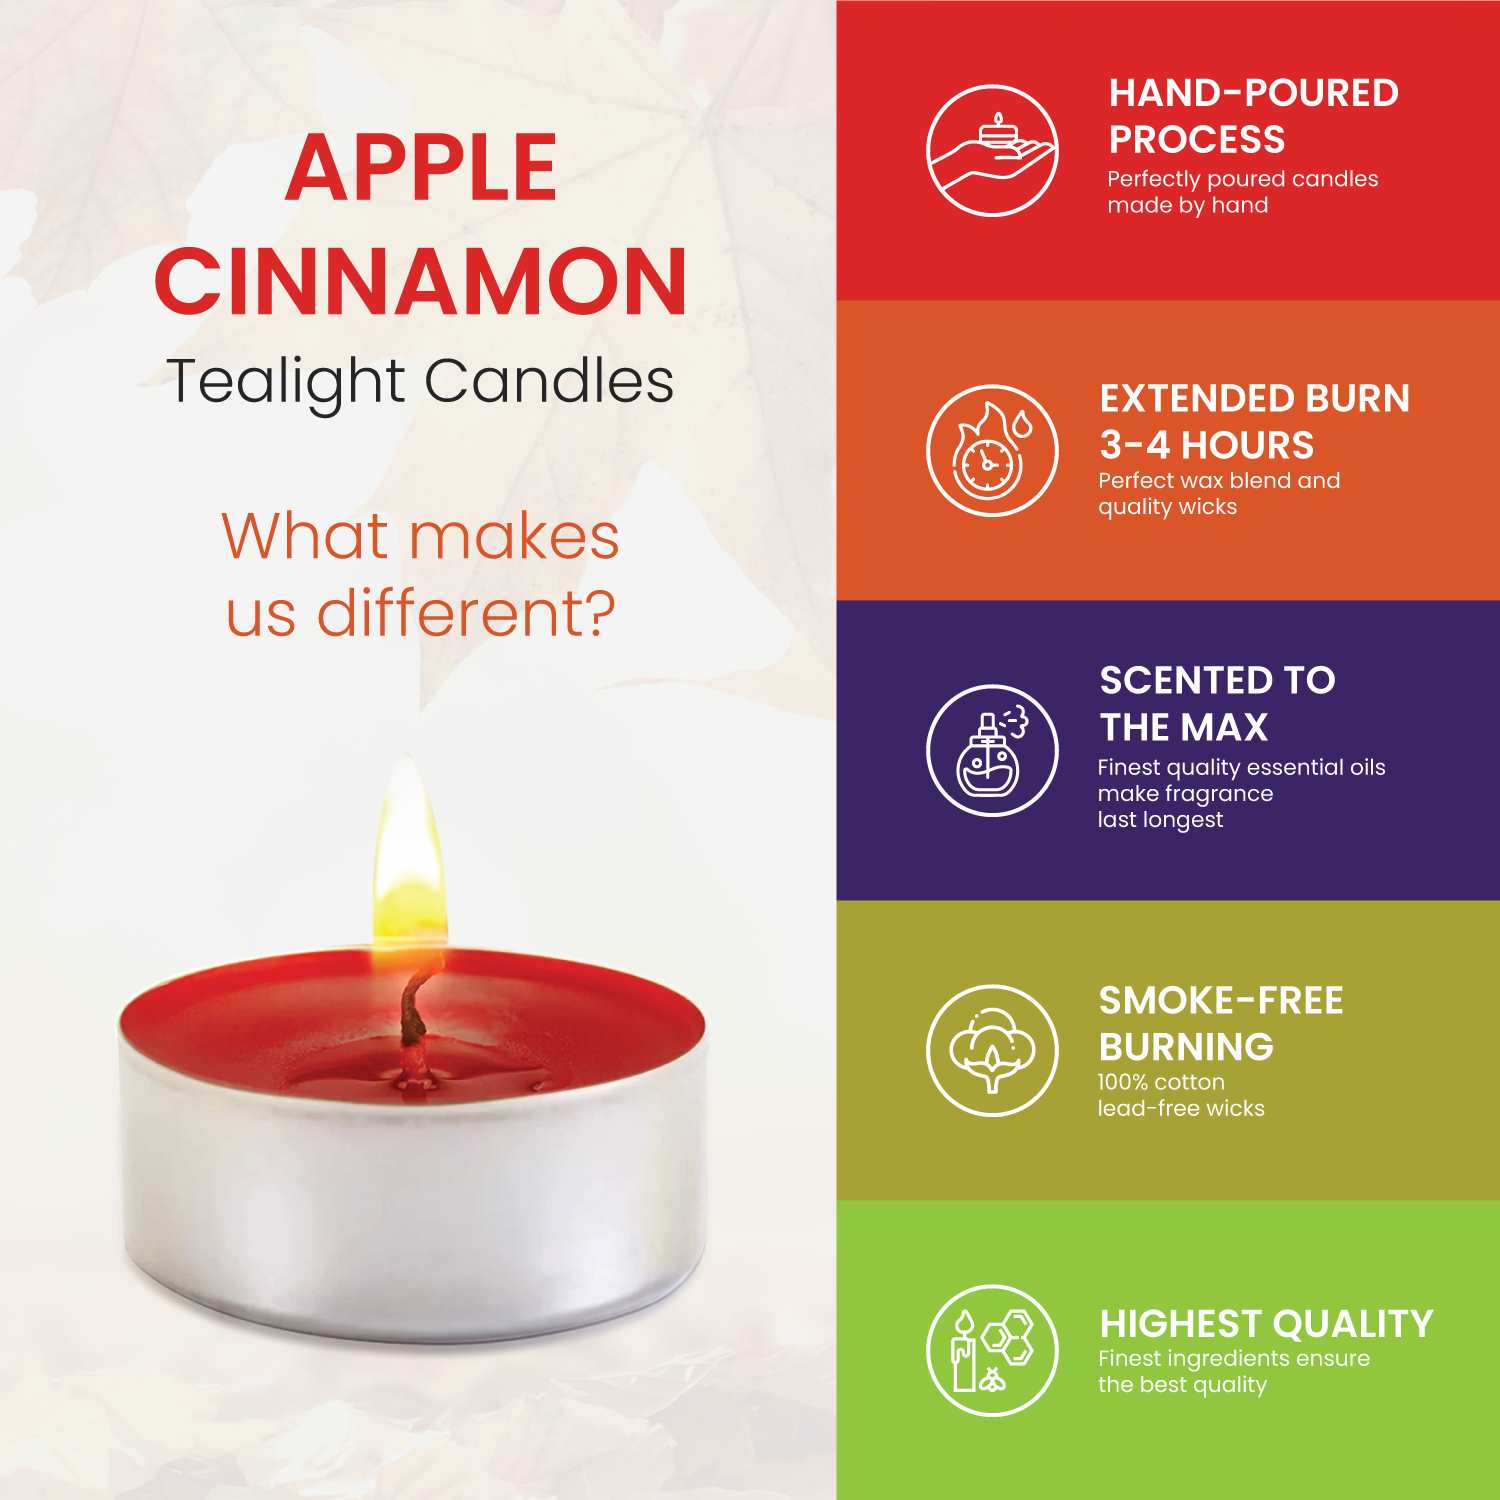 Apple Cinnamon Scented Tealight Candles - 30 Pack